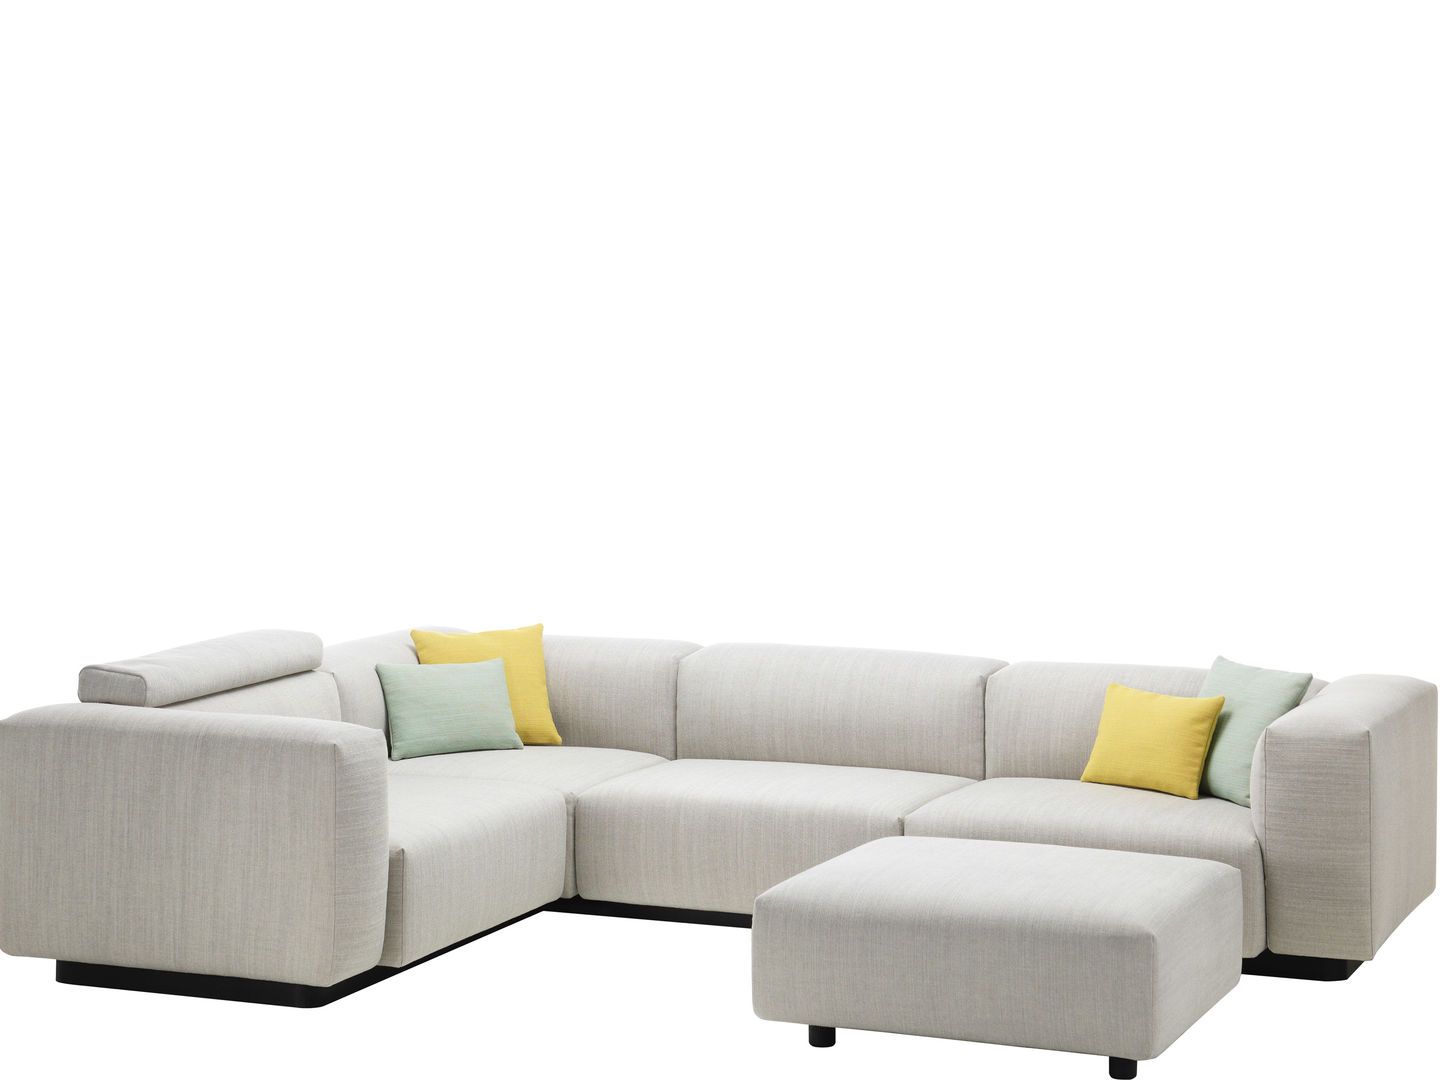 Vitra Soft Modular Sofa Three-seater, corner element, and Ottoman from One52 Furniture website